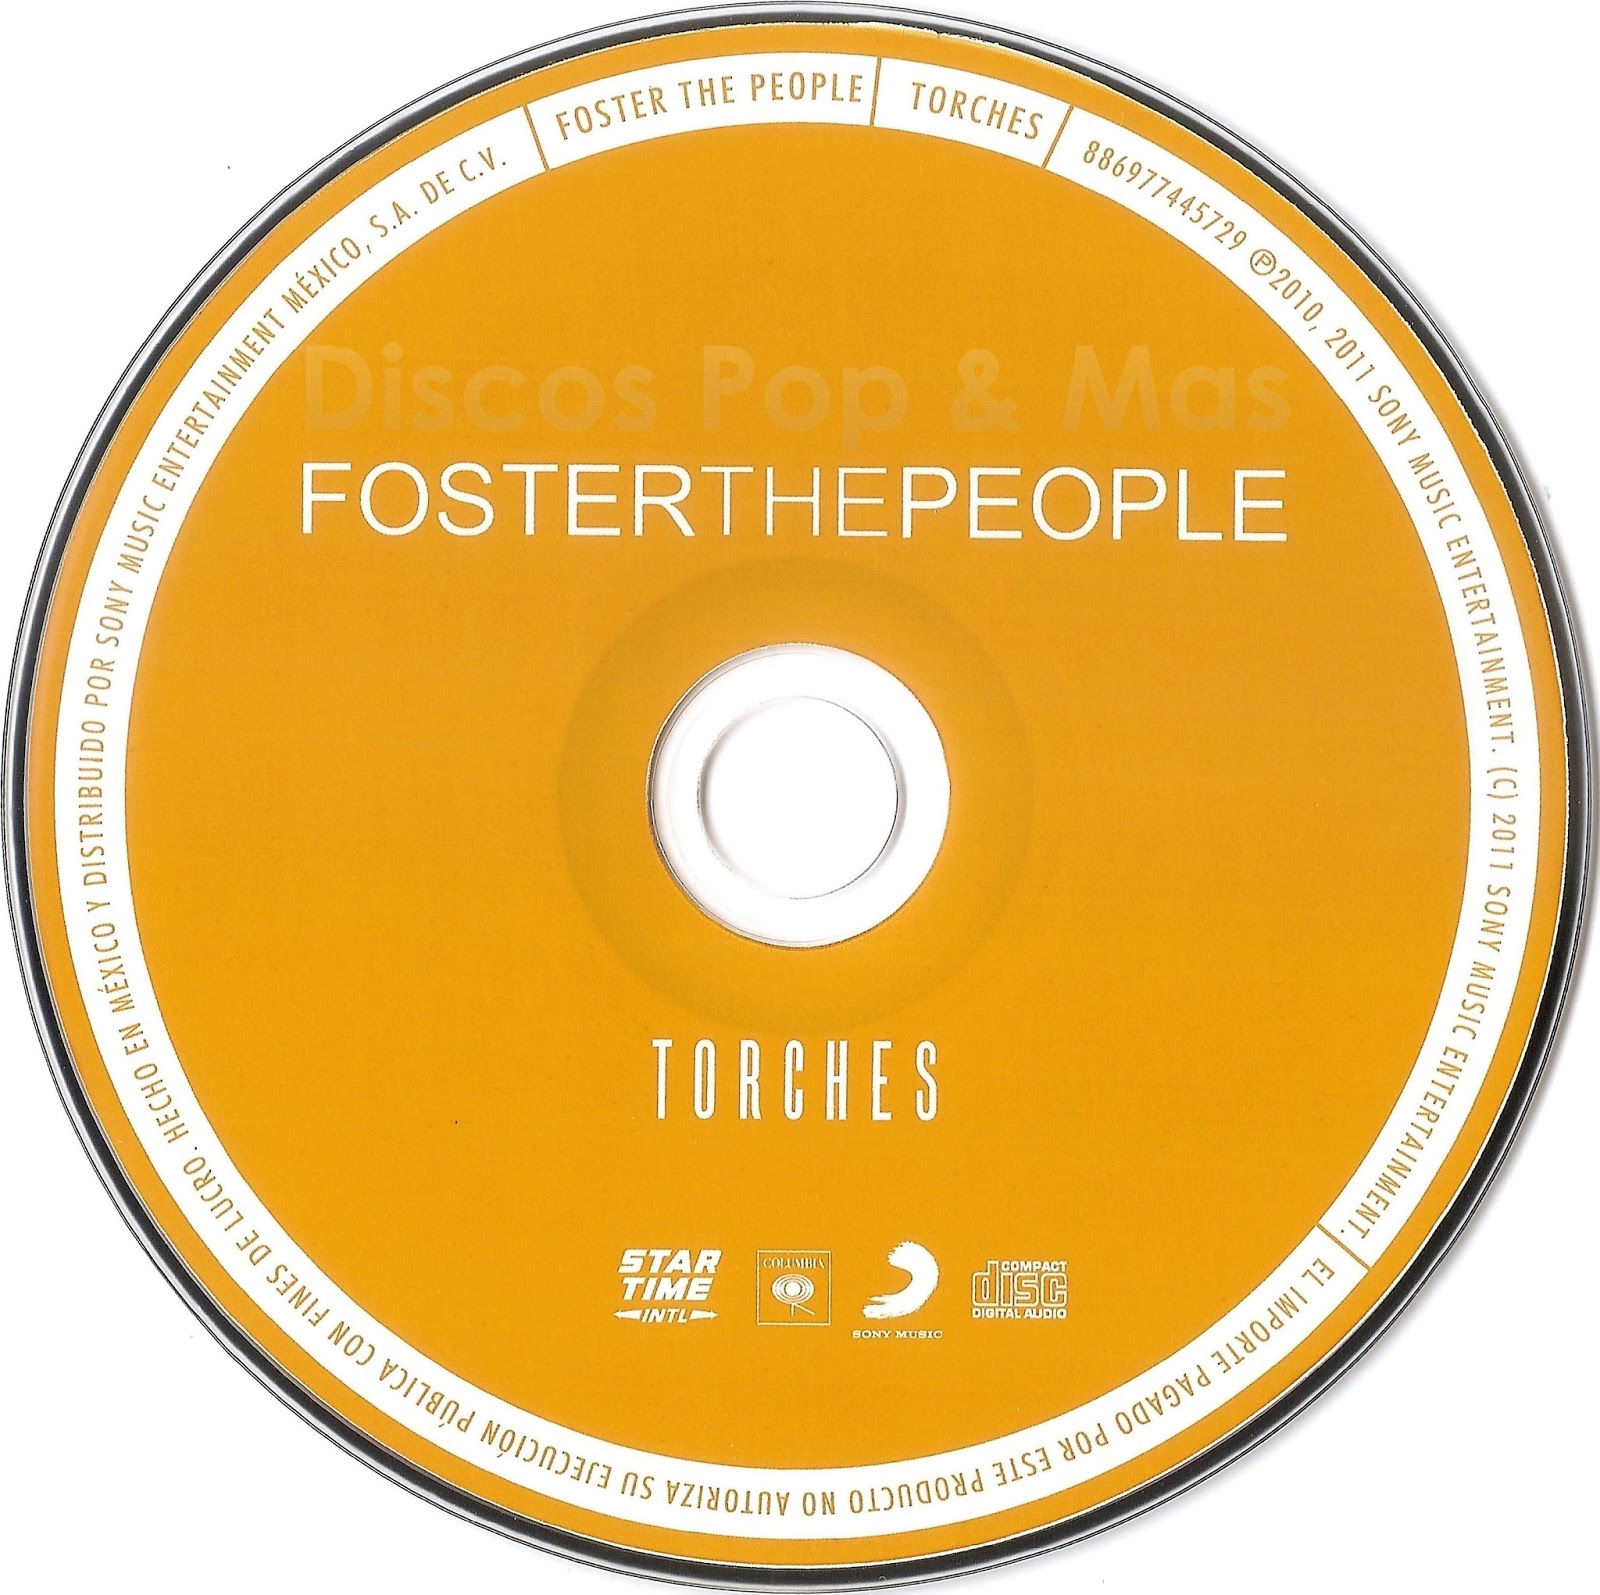 Discos Pop & Mas Foster the People Torches